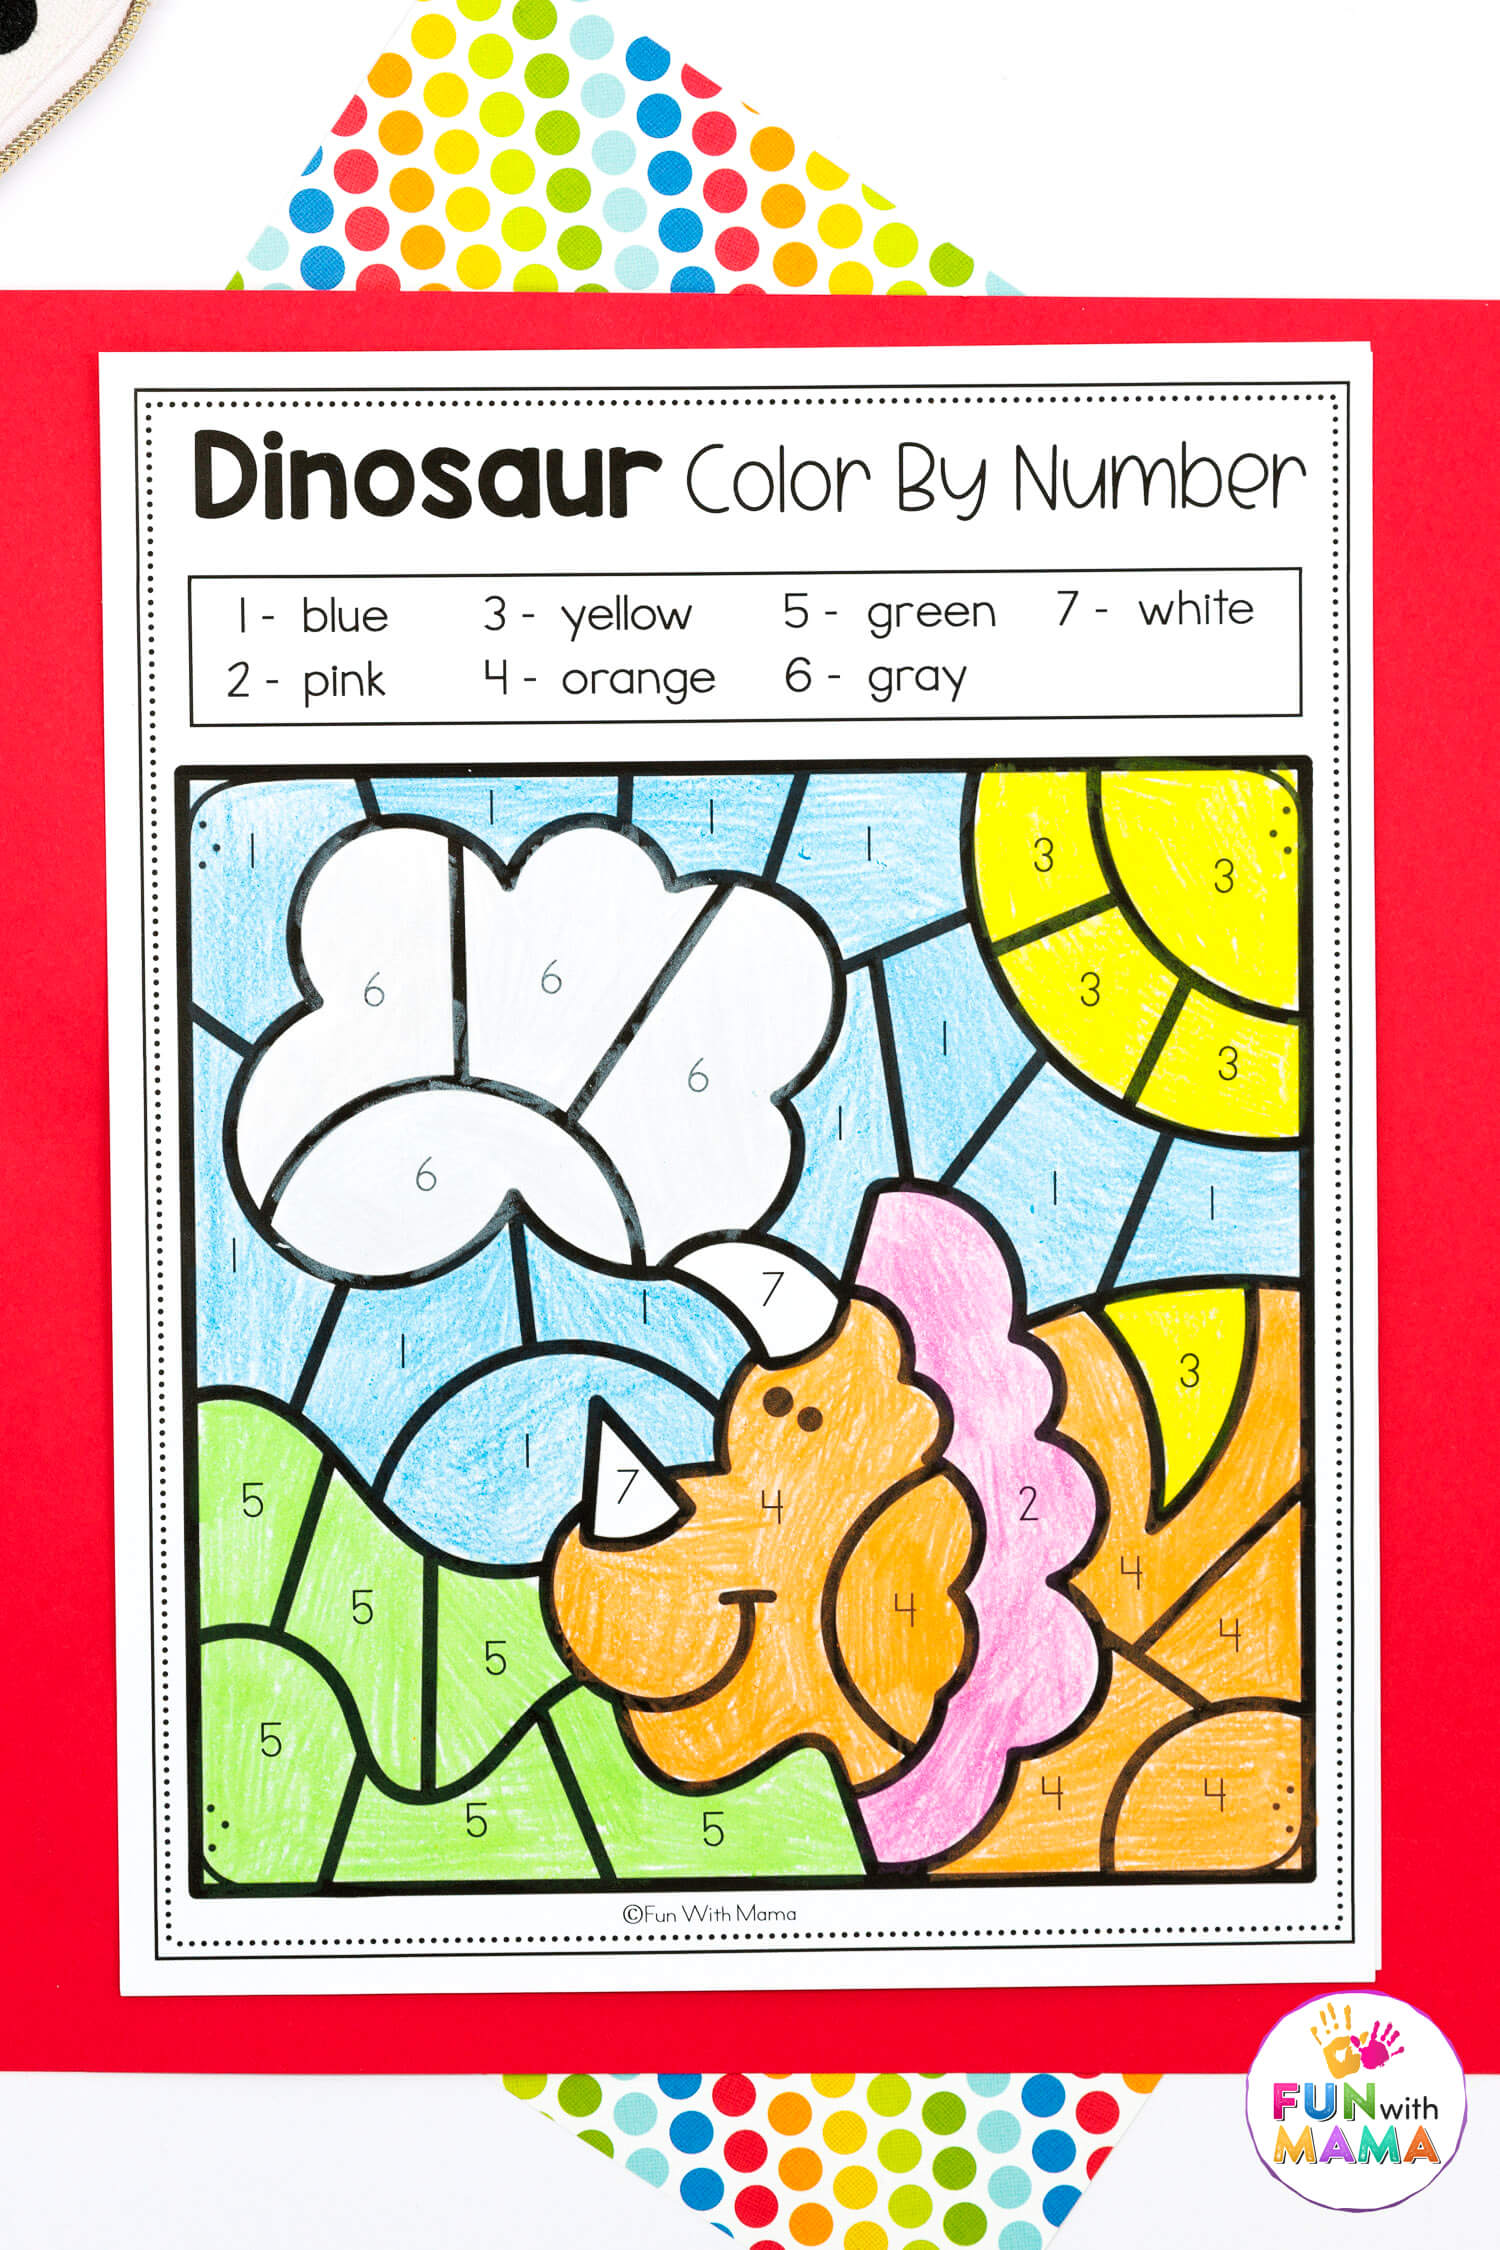 triceratops dinosaur color by number colored in with 7 crayons